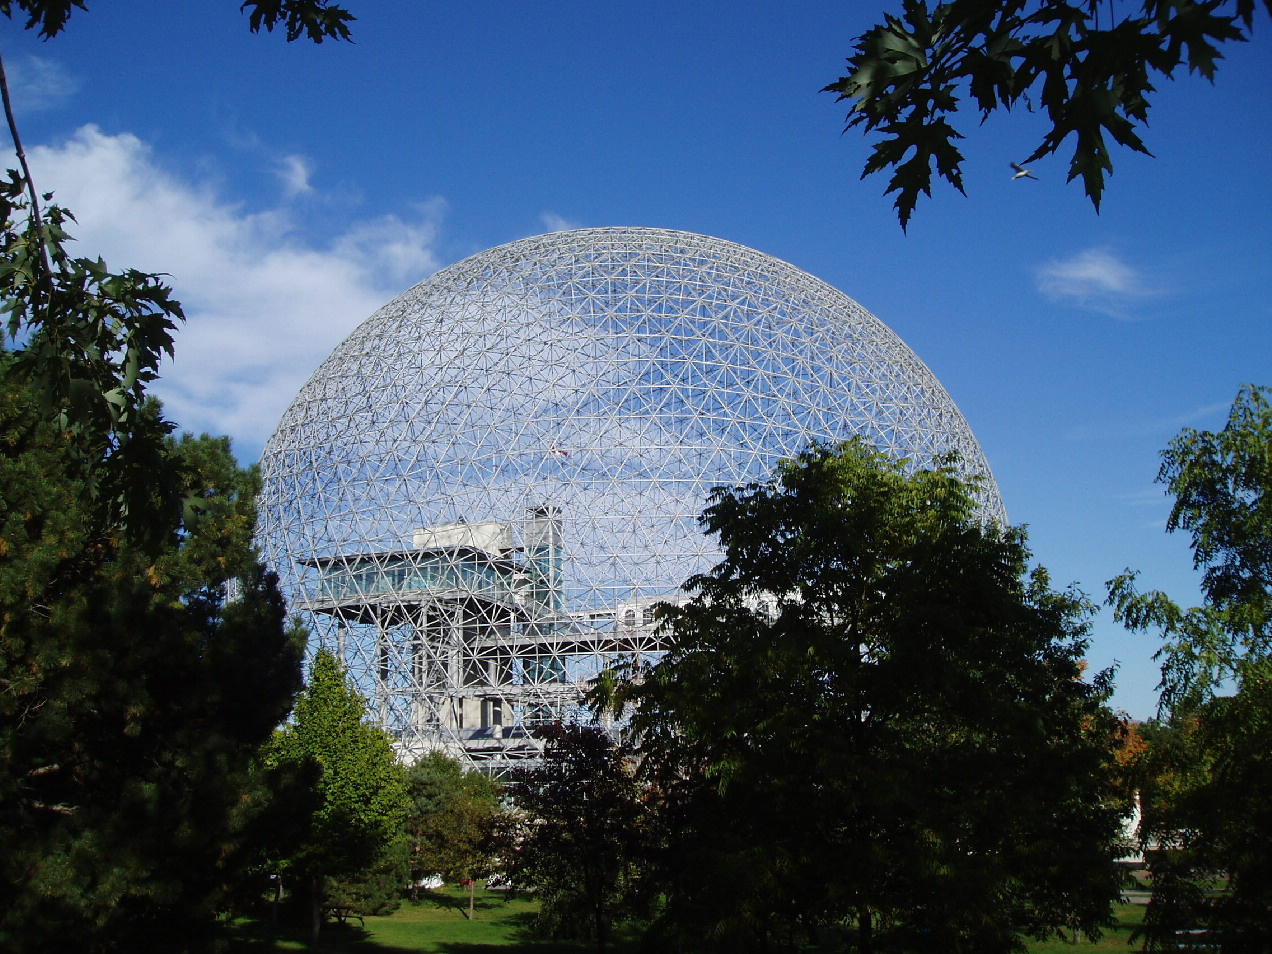 Image of a Geodesic dome